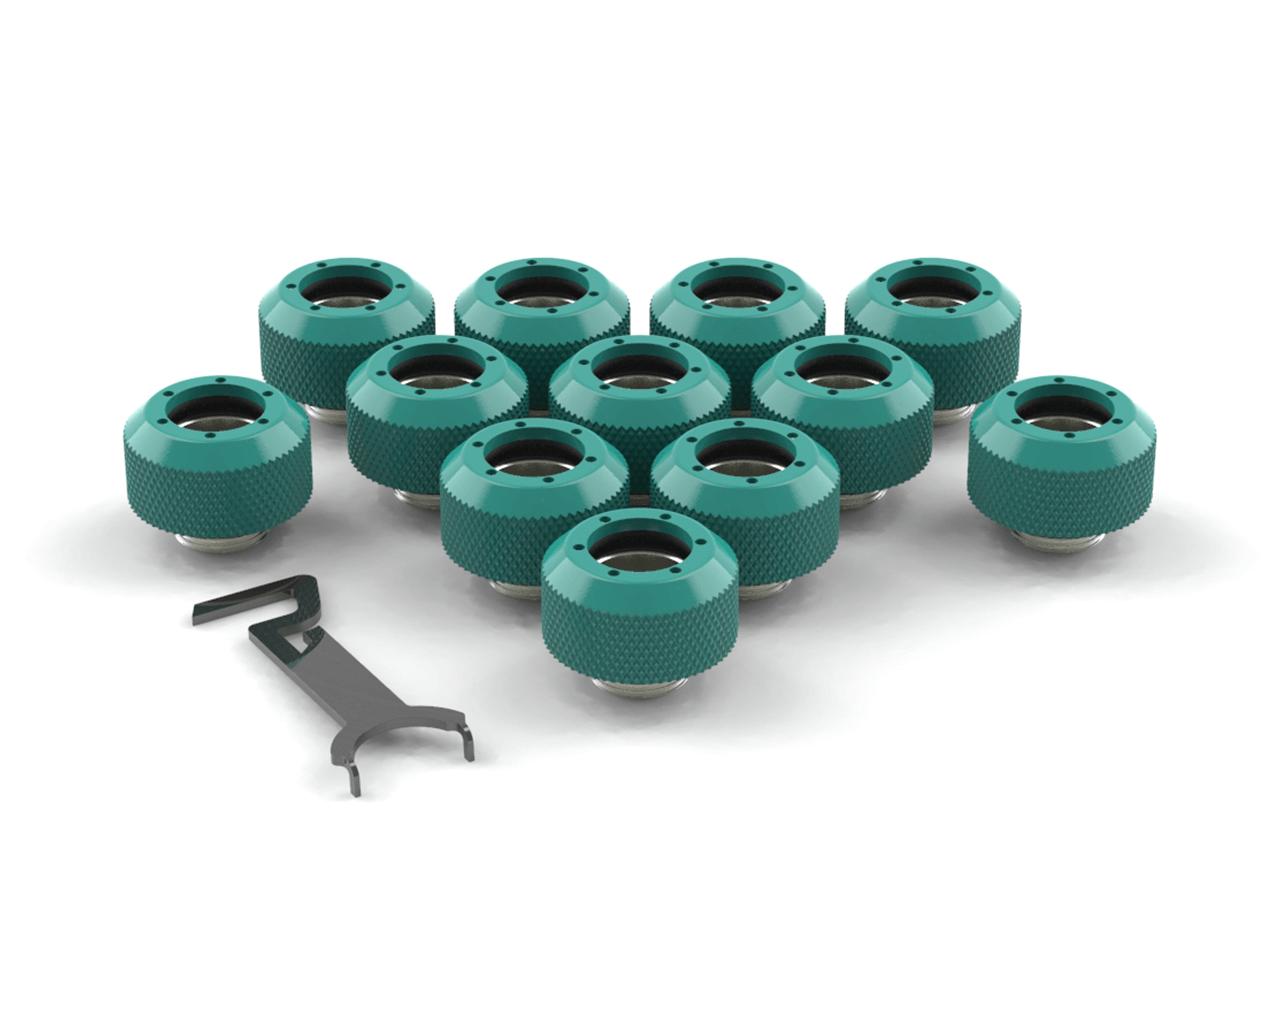 PrimoChill 1/2in. Rigid RevolverSX Series Fitting - 12 pack - PrimoChill - KEEPING IT COOL Teal